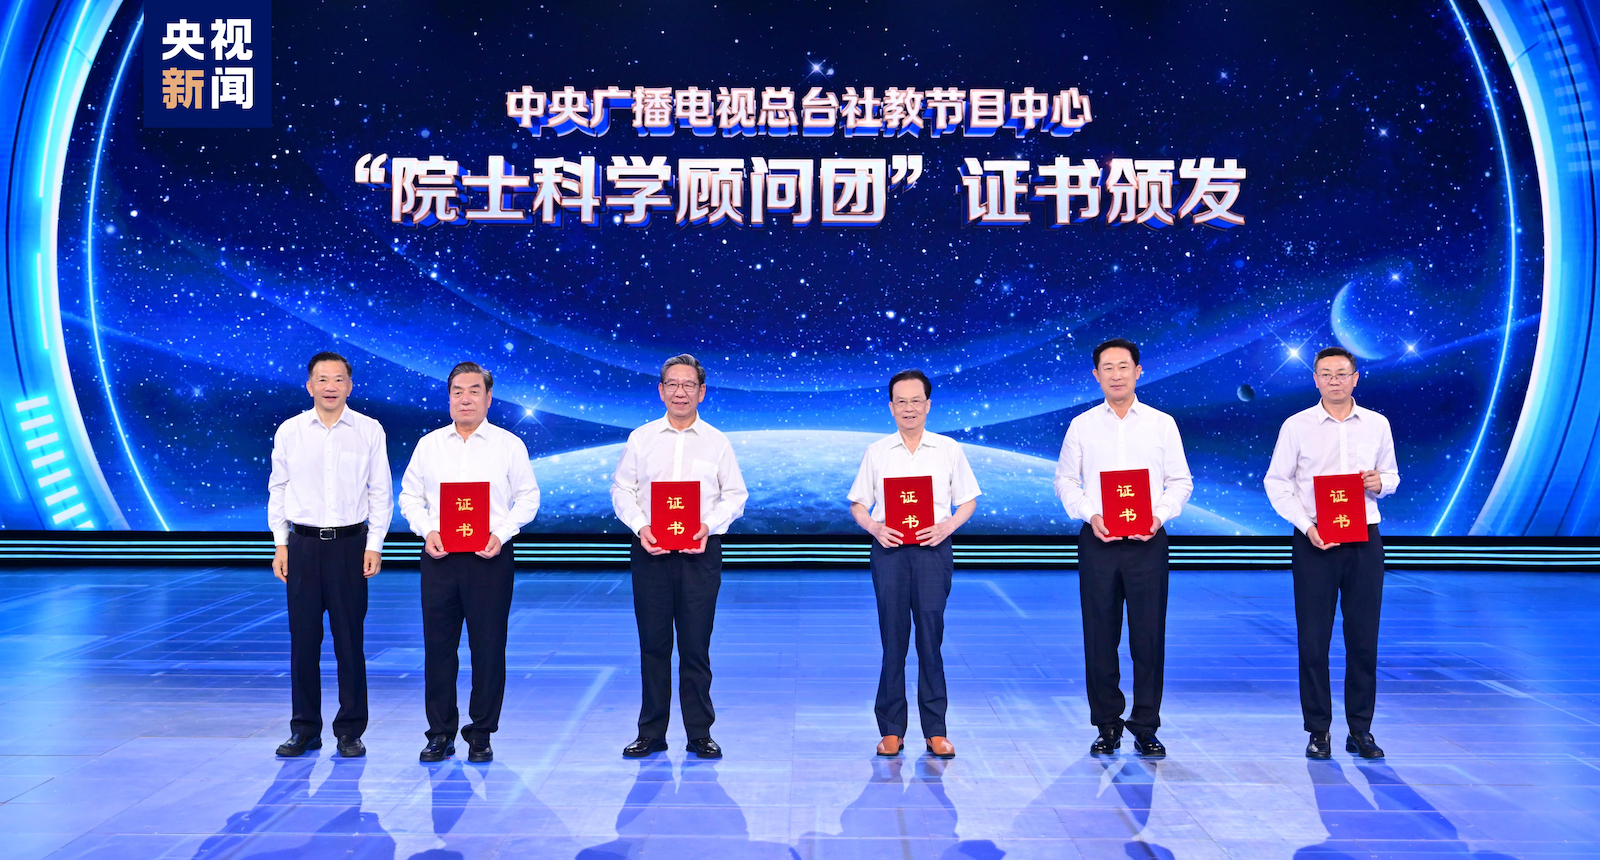 Shen Haixiong (1st left), vice minister of the Publicity Department of the CPC Central Committee and president of CMG, and part of the 